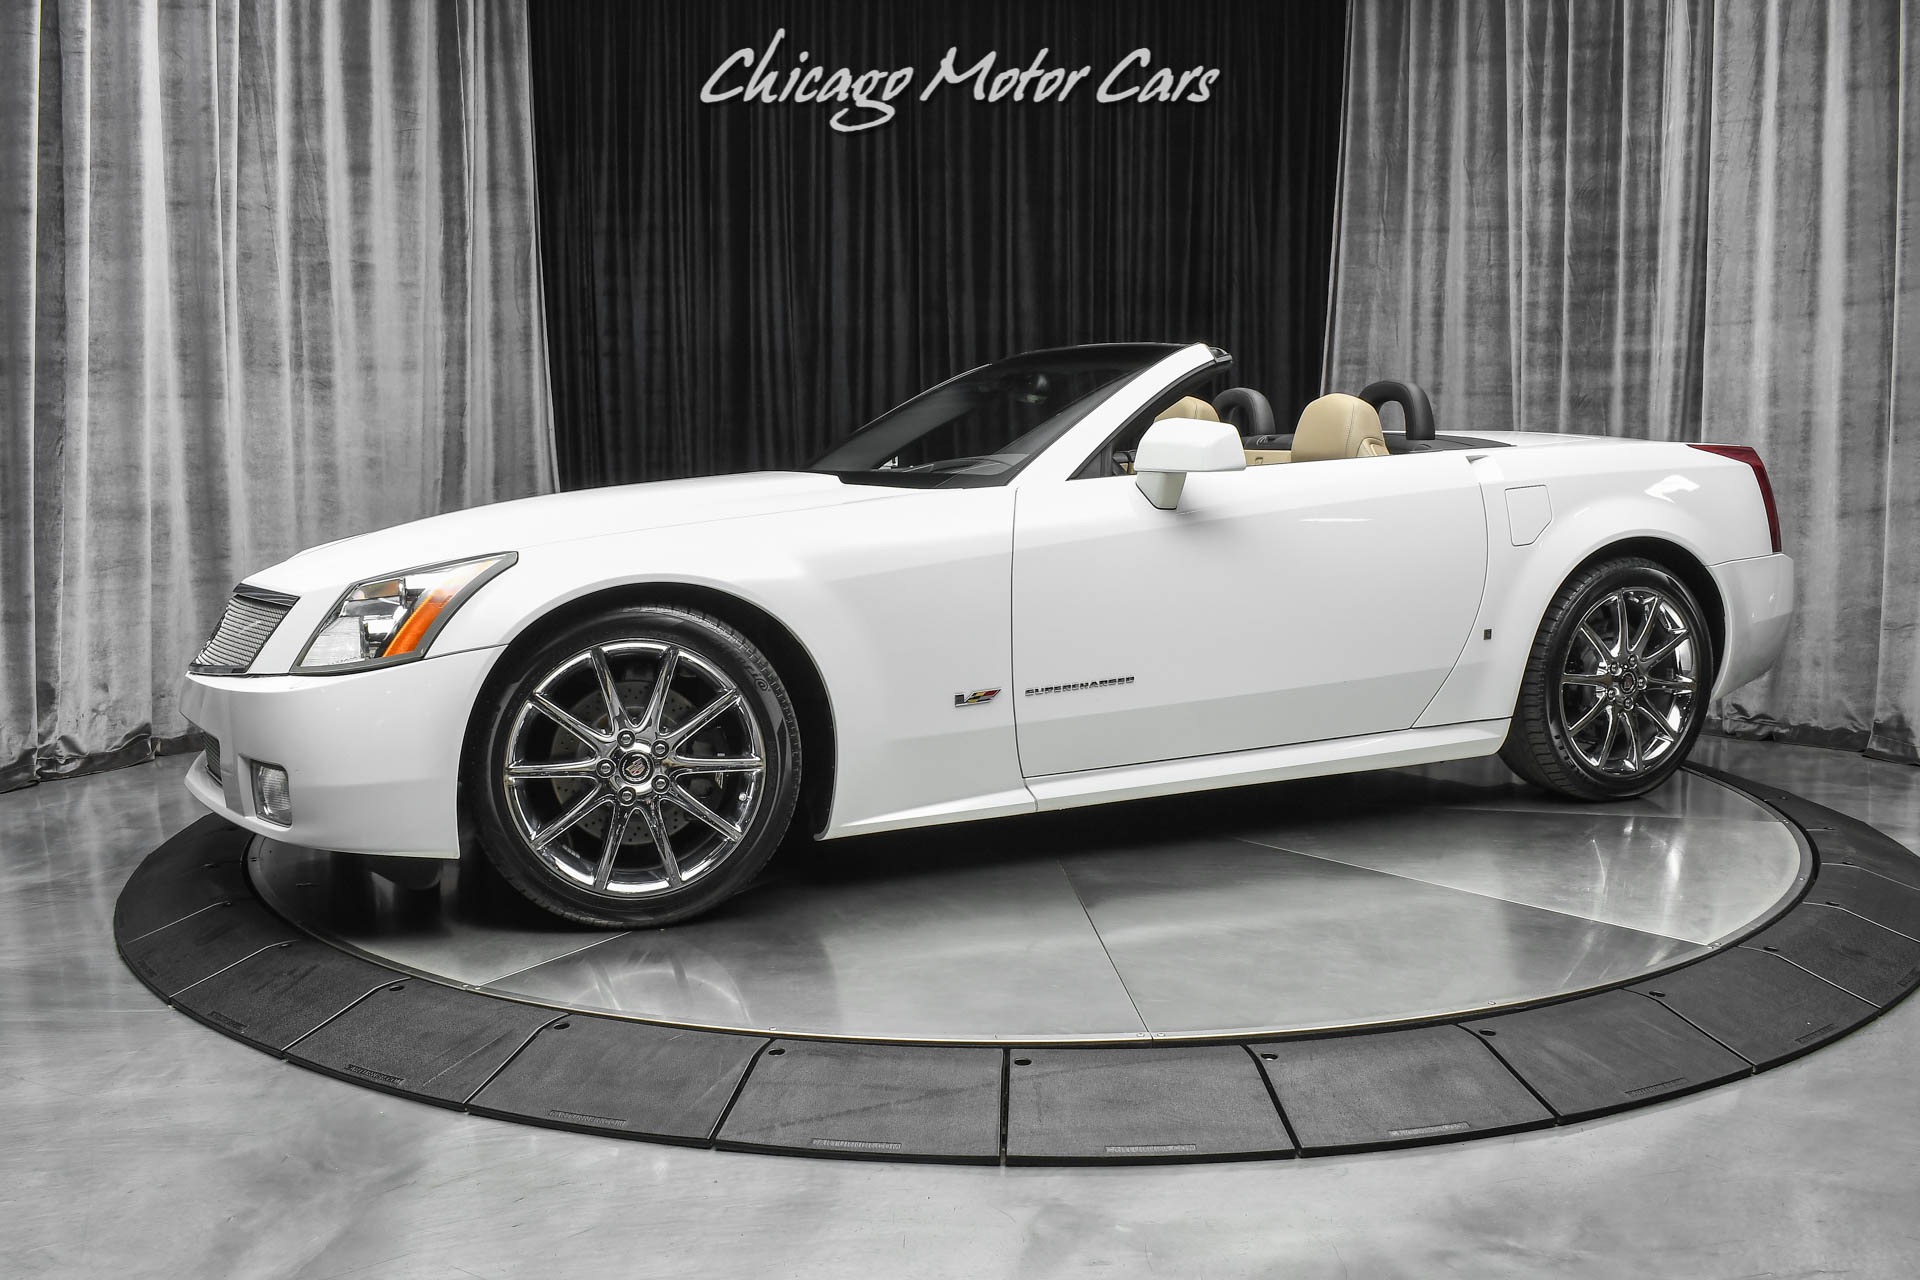 Used 2008 Cadillac XLR-V $102k+MSRP! 1 of 61 XLR-V Alpine White Editions!  RARE! For Sale (Special Pricing) | Chicago Motor Cars Stock #18149